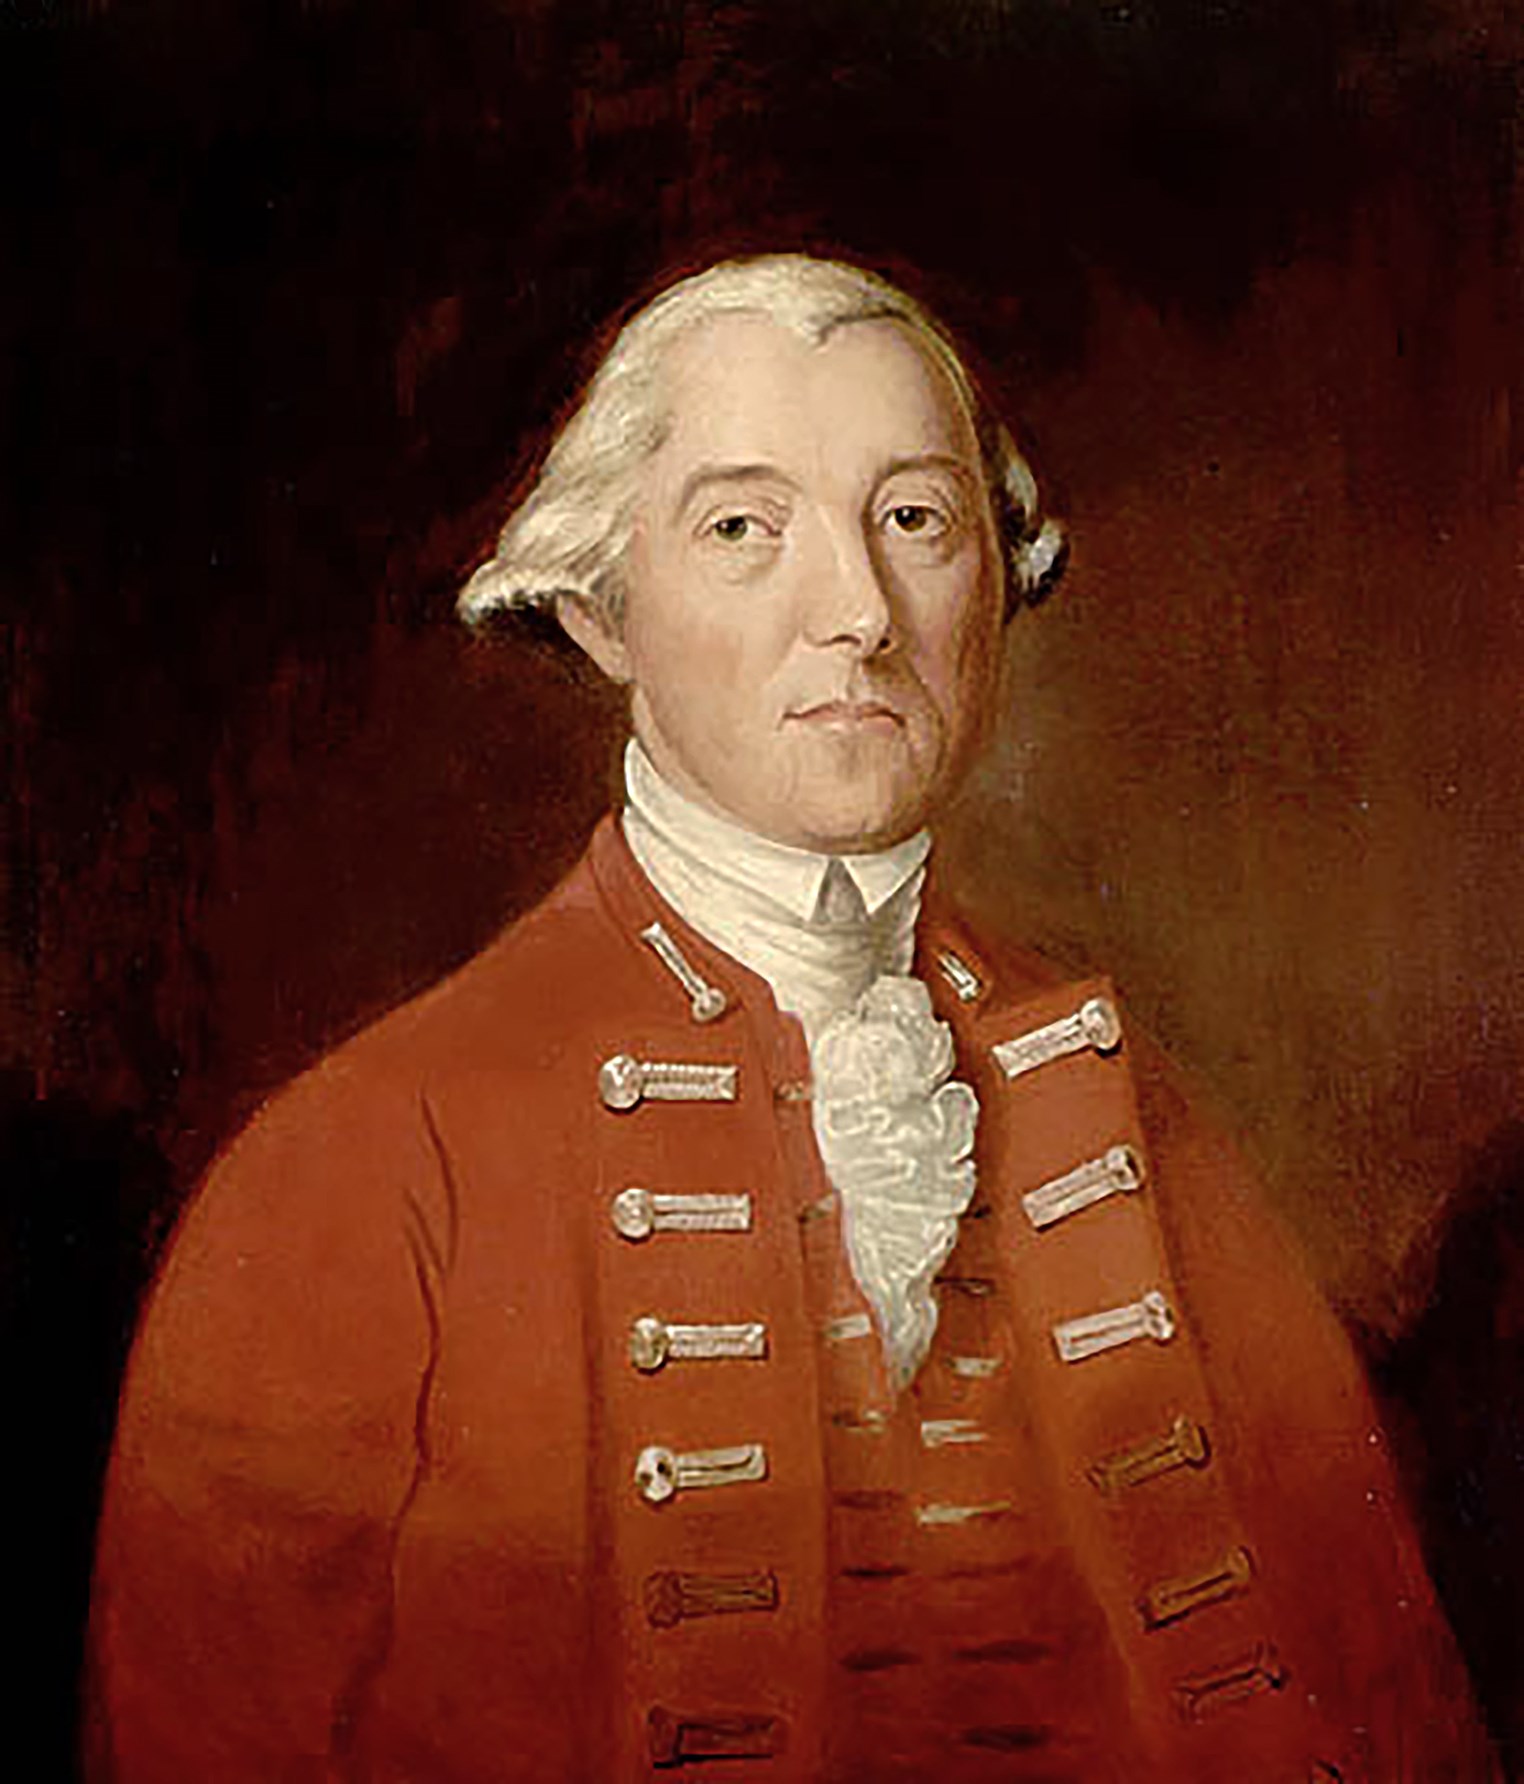 Portrait of Sir Guy Carleton, Lord Dorchester, Governor of Quebec from 1768 to 1778 and 1786 to 1796, by an unknown artist, circa 1760. (Photo credit: Library and Archives Canada)